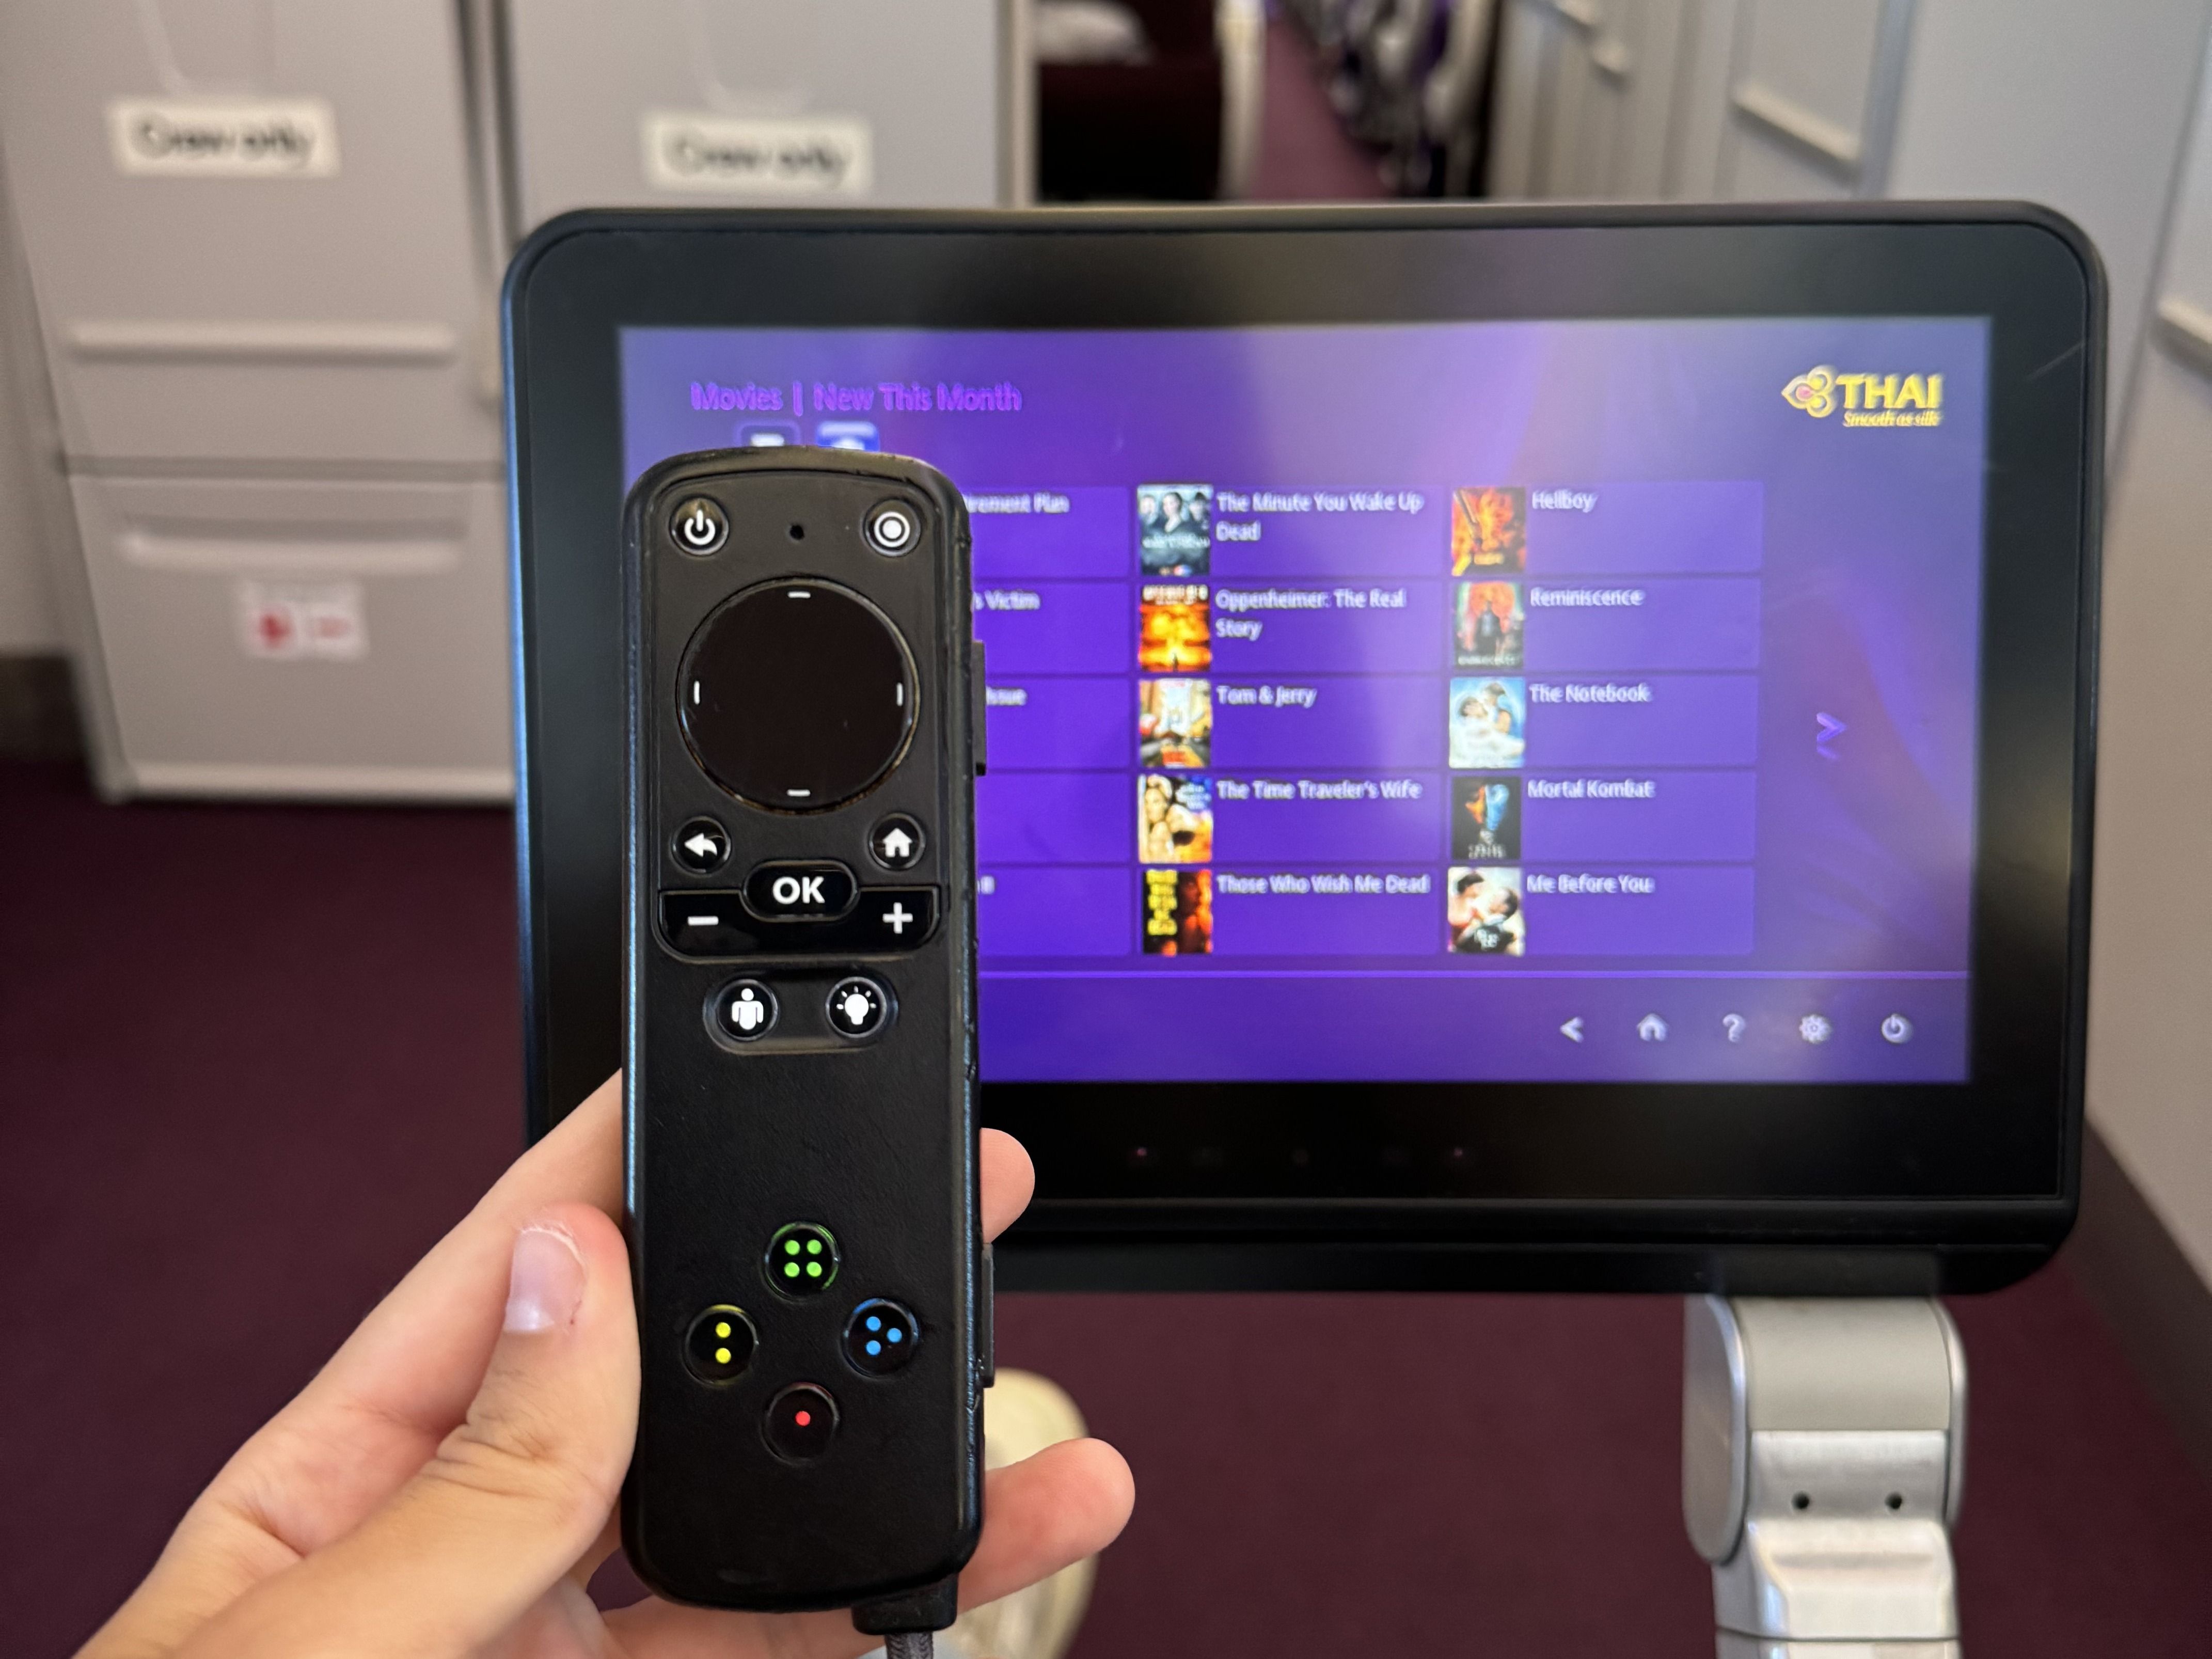 The Thai Airways IFE screen and remote.